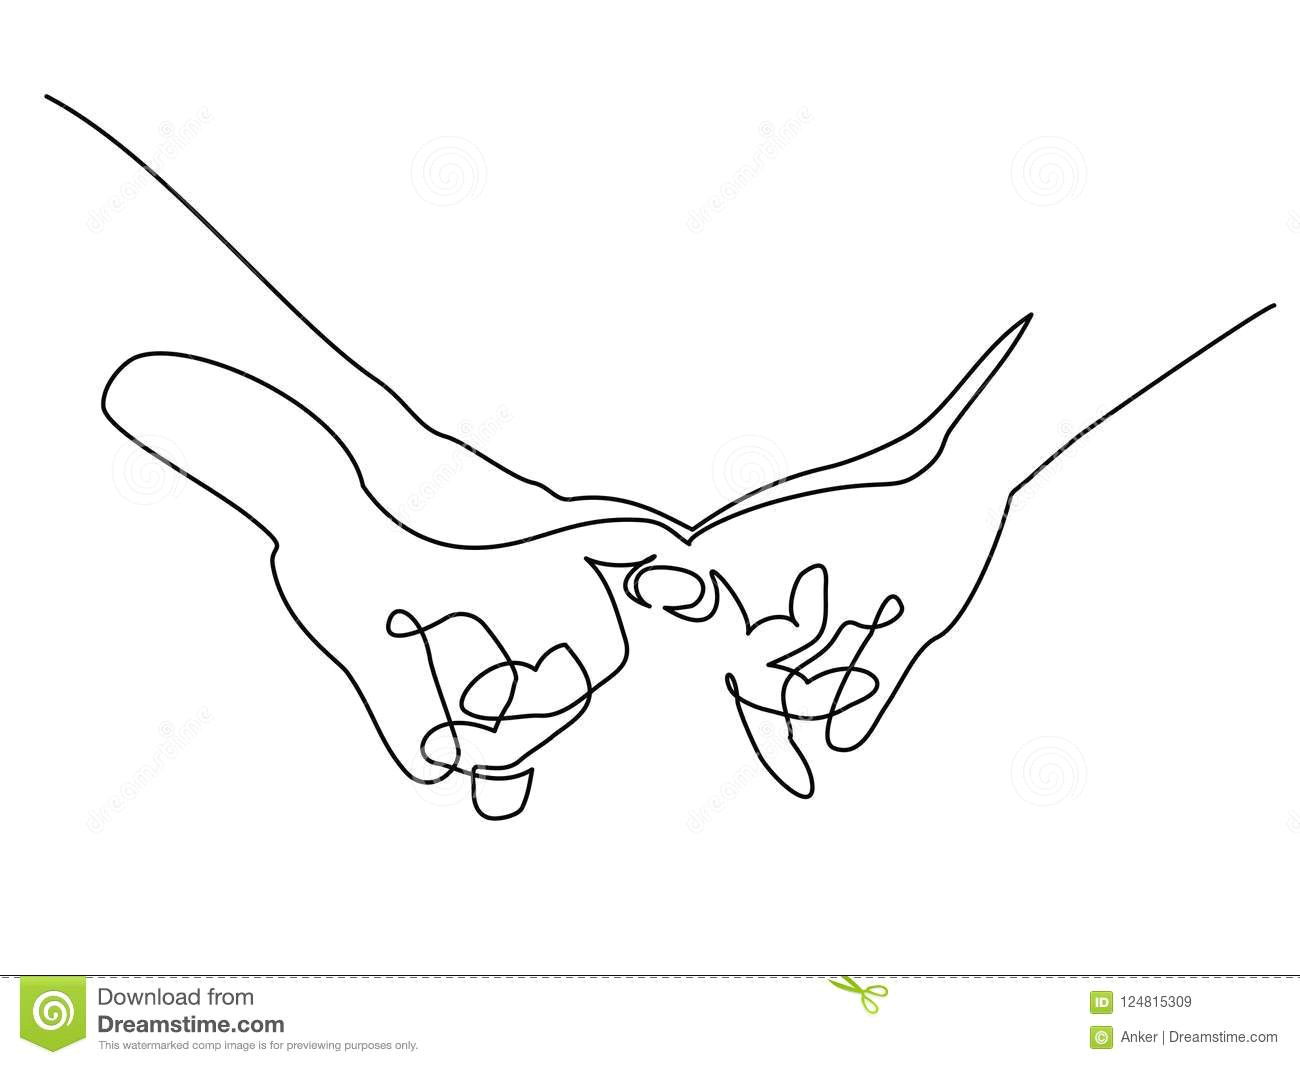 Drawings Of Hands Holding Each Other Hands Woman and Man Holding together with Fingers Stock Vector